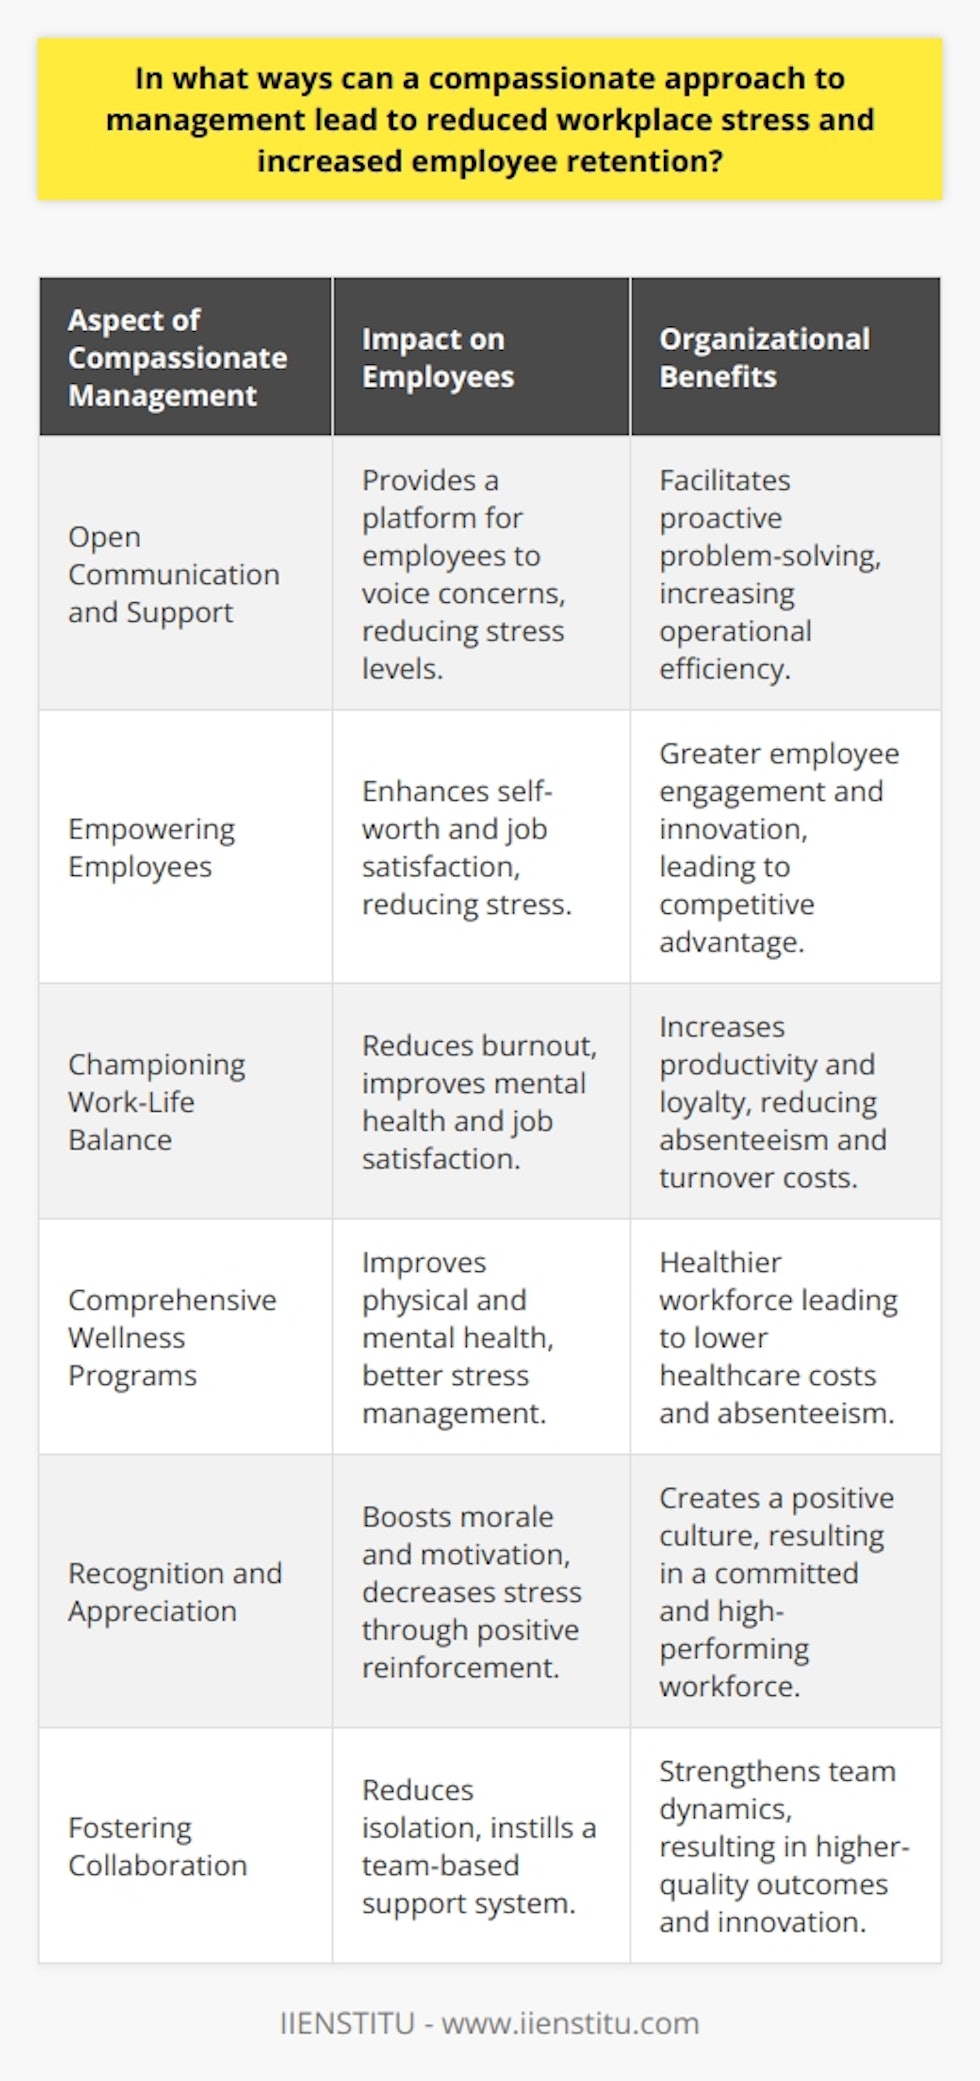 Compassionate management is an approach that prioritizes the wellbeing of employees, emphasizing understanding, care, and support within the workplace. By adopting compassionate leadership, organizations can address workplace stress head-on and maintain a stable and committed workforce.### Open Communication and SupportKey to compassionate management is establishing an environment where open communication is the norm. Employees who feel heard and supported are more likely to approach management with their concerns, leading to proactive problem-solving and the mitigation of stress. A compassionate leader listens attentively, acknowledges the stresses employees face, and works collaboratively to find solutions.### Empowering EmployeesCompassionate management recognizes the value of each employee as an individual with their own talents and needs. Managers who demonstrate understanding and flexibility enable employees to thrive. Empowerment comes in many forms, including providing opportunities for growth, offering constructive feedback, and respecting employees' autonomy. When workers feel empowered, they experience lower levels of workplace stress and a greater sense of contribution to the company's success.### Championing Work-Life BalanceRecognizing the importance of a healthy work-life balance is a critical aspect of compassionate management. Leaders who encourage their employees to maintain this balance show that they value their team's wellbeing outside of the office. Flexible working arrangements, understanding in times of personal need, and policies that promote time off for rejuvenation are all beneficial in reducing stress and preventing burnout.### Comprehensive Wellness ProgramsCompassionate organizations go beyond basic healthcare benefits by implementing comprehensive wellness programs that encompass preventive health, mental health resources, and stress management workshops. These programs signal to employees that their overall health is a priority, providing tools and resources for managing stress more effectively.### Recognition and AppreciationA workplace where recognition and appreciation are regularly expressed contributes to a positive organizational culture. Compassionate management makes it a point to celebrate milestones, acknowledge employee efforts, and reward outstanding performance. This recognition bolsters morale, motivates employees, and reduces workplace stress by reinforcing the value of individual contributions.### Fostering CollaborationPromoting teamwork and a sense of community within the workplace is a testament to compassionate leadership. Developing a collaborative environment where ideas and responsibilities are shared helps in building trust and support among staff. This culture can alleviate feelings of isolation and stress, as employees know they are part of a team that has their back.### Final ThoughtsThe compassionate approach to management goes beyond mere leadership tactics; it is a philosophy that, when integrated into the company's fabric, can transform the work environment. Reduced workplace stress and increased employee retention are natural outcomes of a culture that values empathy, support, and recognition. This ethos not only enhances the working life of employees but also contributes to the sustainable success of the organization by cultivating a resilient and committed workforce.